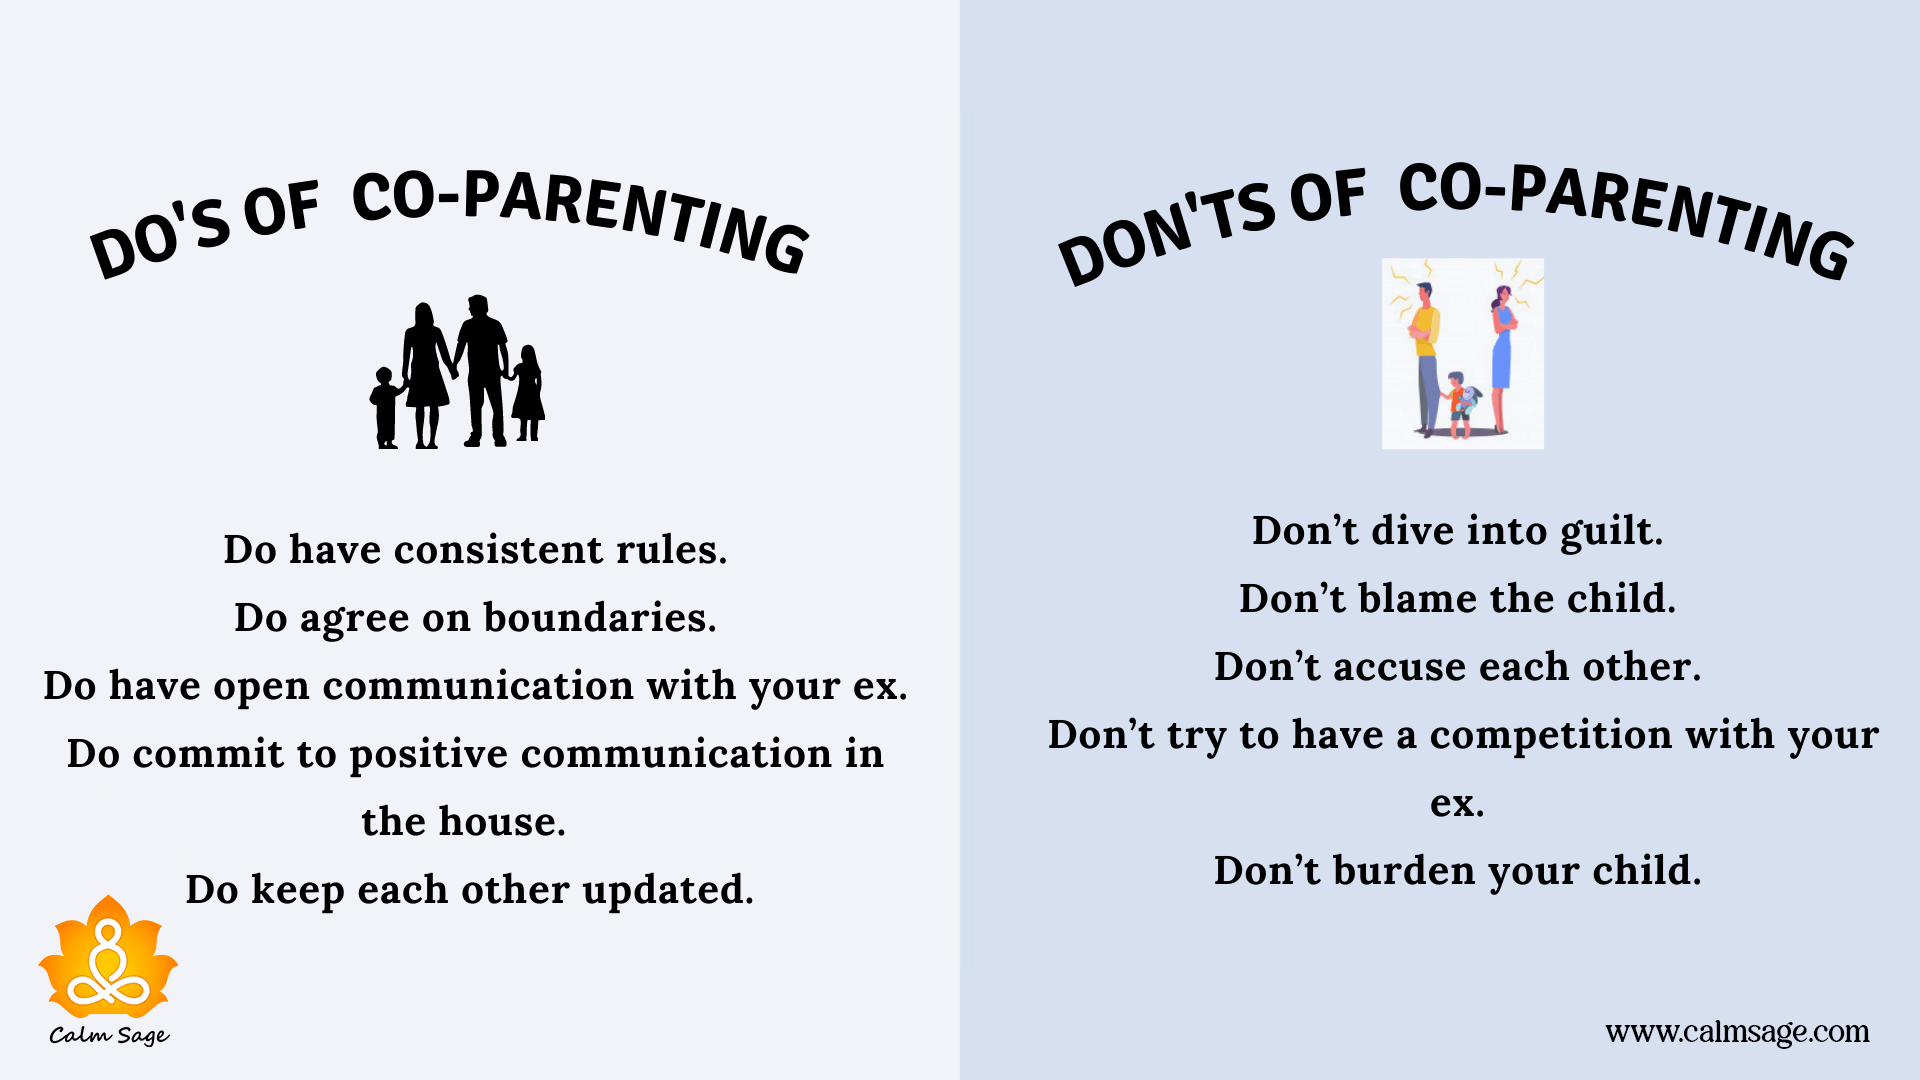 Do’s and Don'ts of Co-parenting